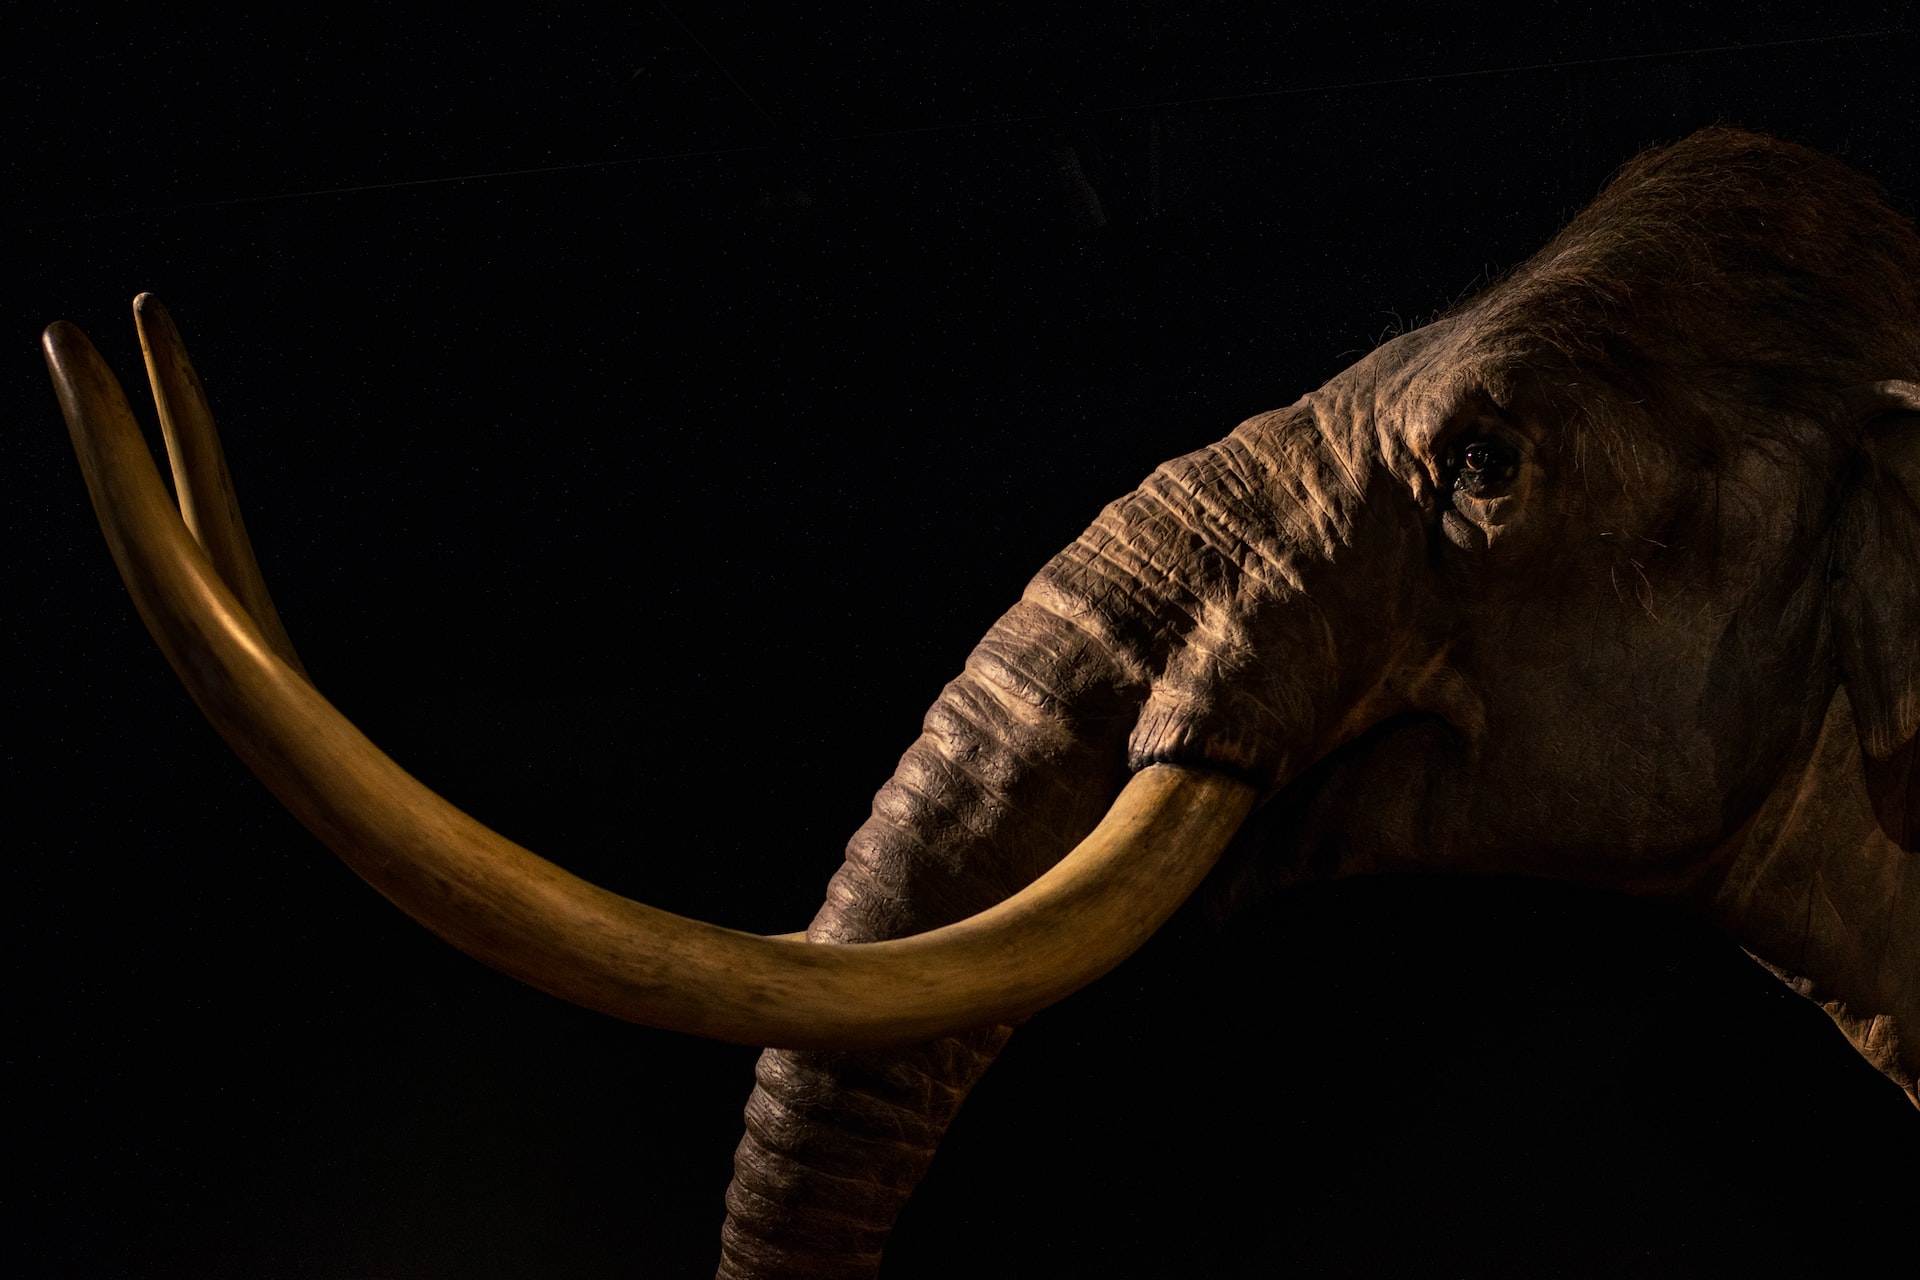 The head of a mammoth against a blank background